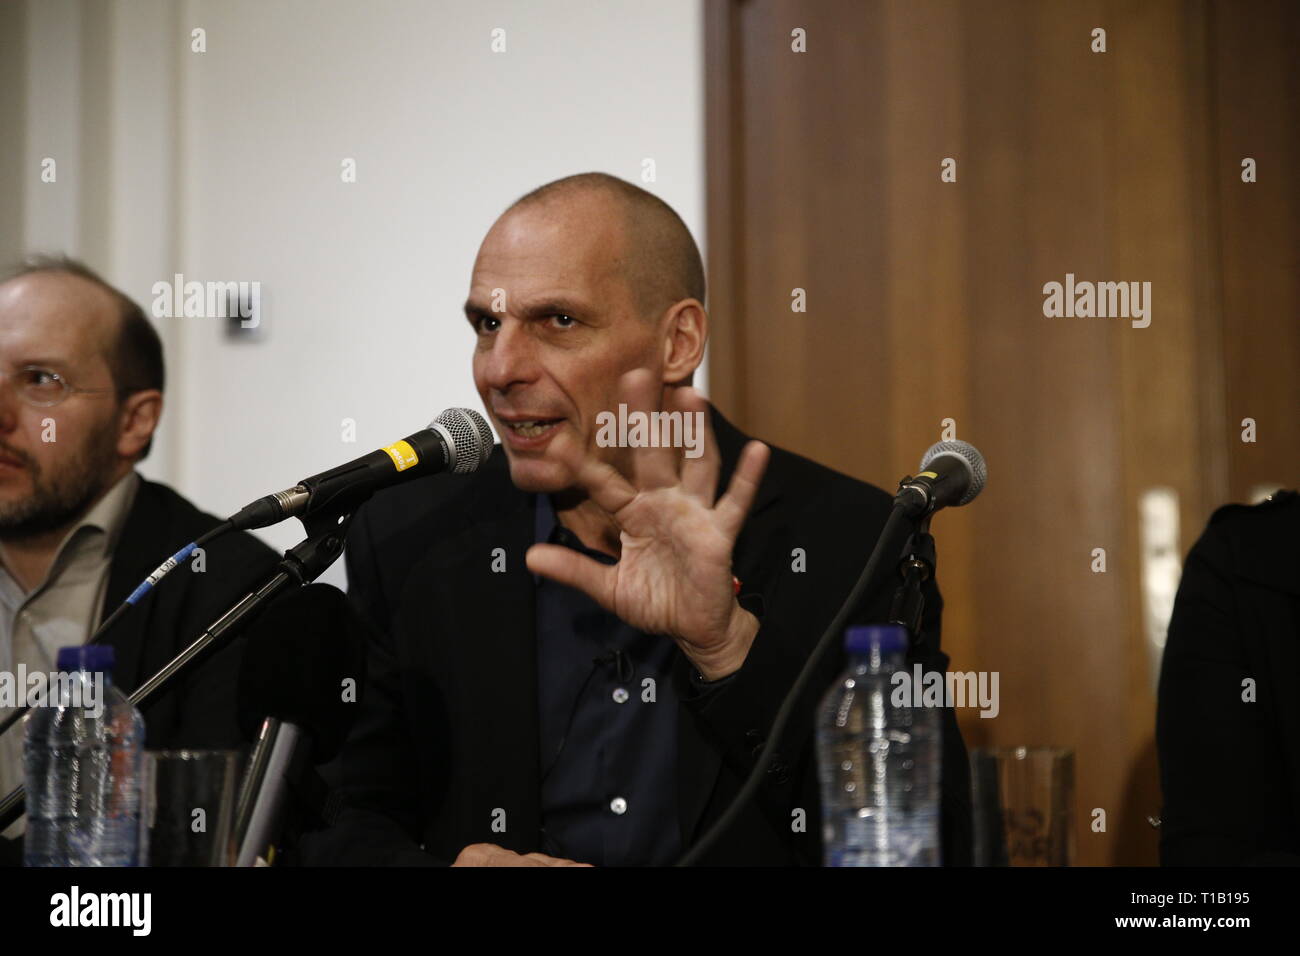 Brussels, Belgium. 25th March 2019. Yanis Varoufakis, lead Member of European Parliament candidate for the movement European Spring attends in press conference. Alexandros Michailidis/Alamy Live News Stock Photo